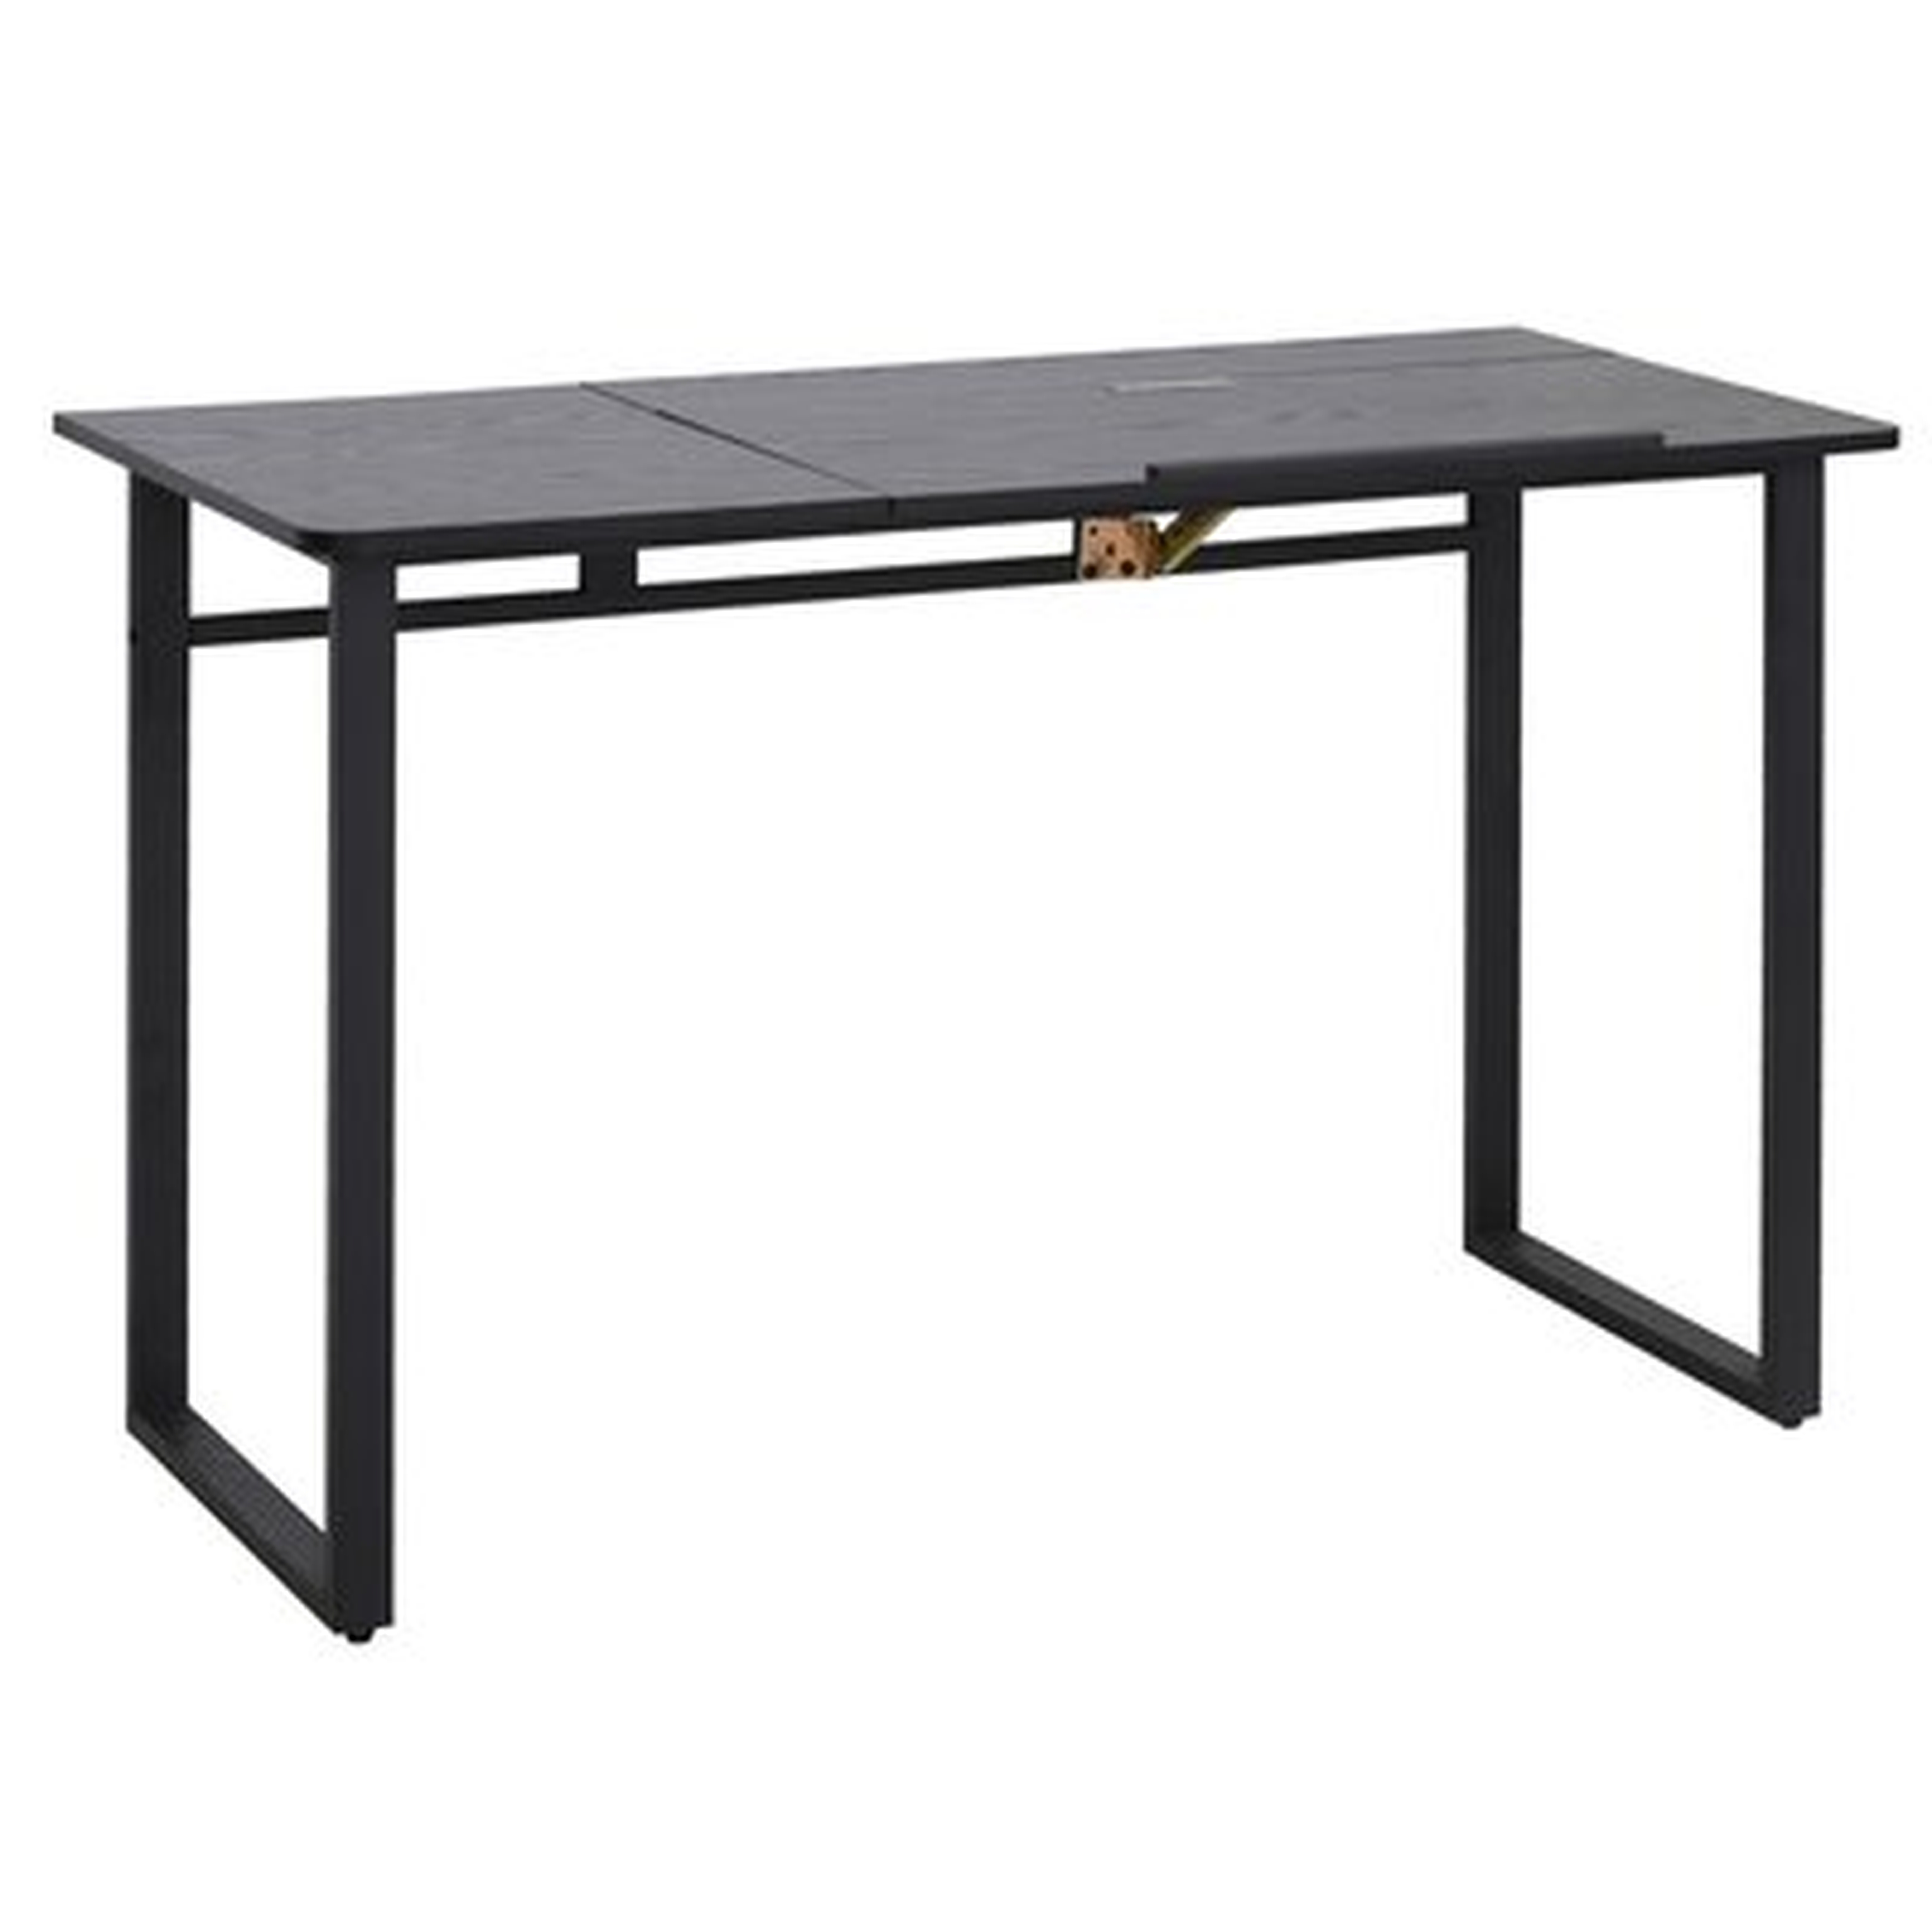 Computer Desk Writing Table With Small Angle Adjustable Tabletop For Drawing Home Office Workstation, Black Wood Grain - Wayfair